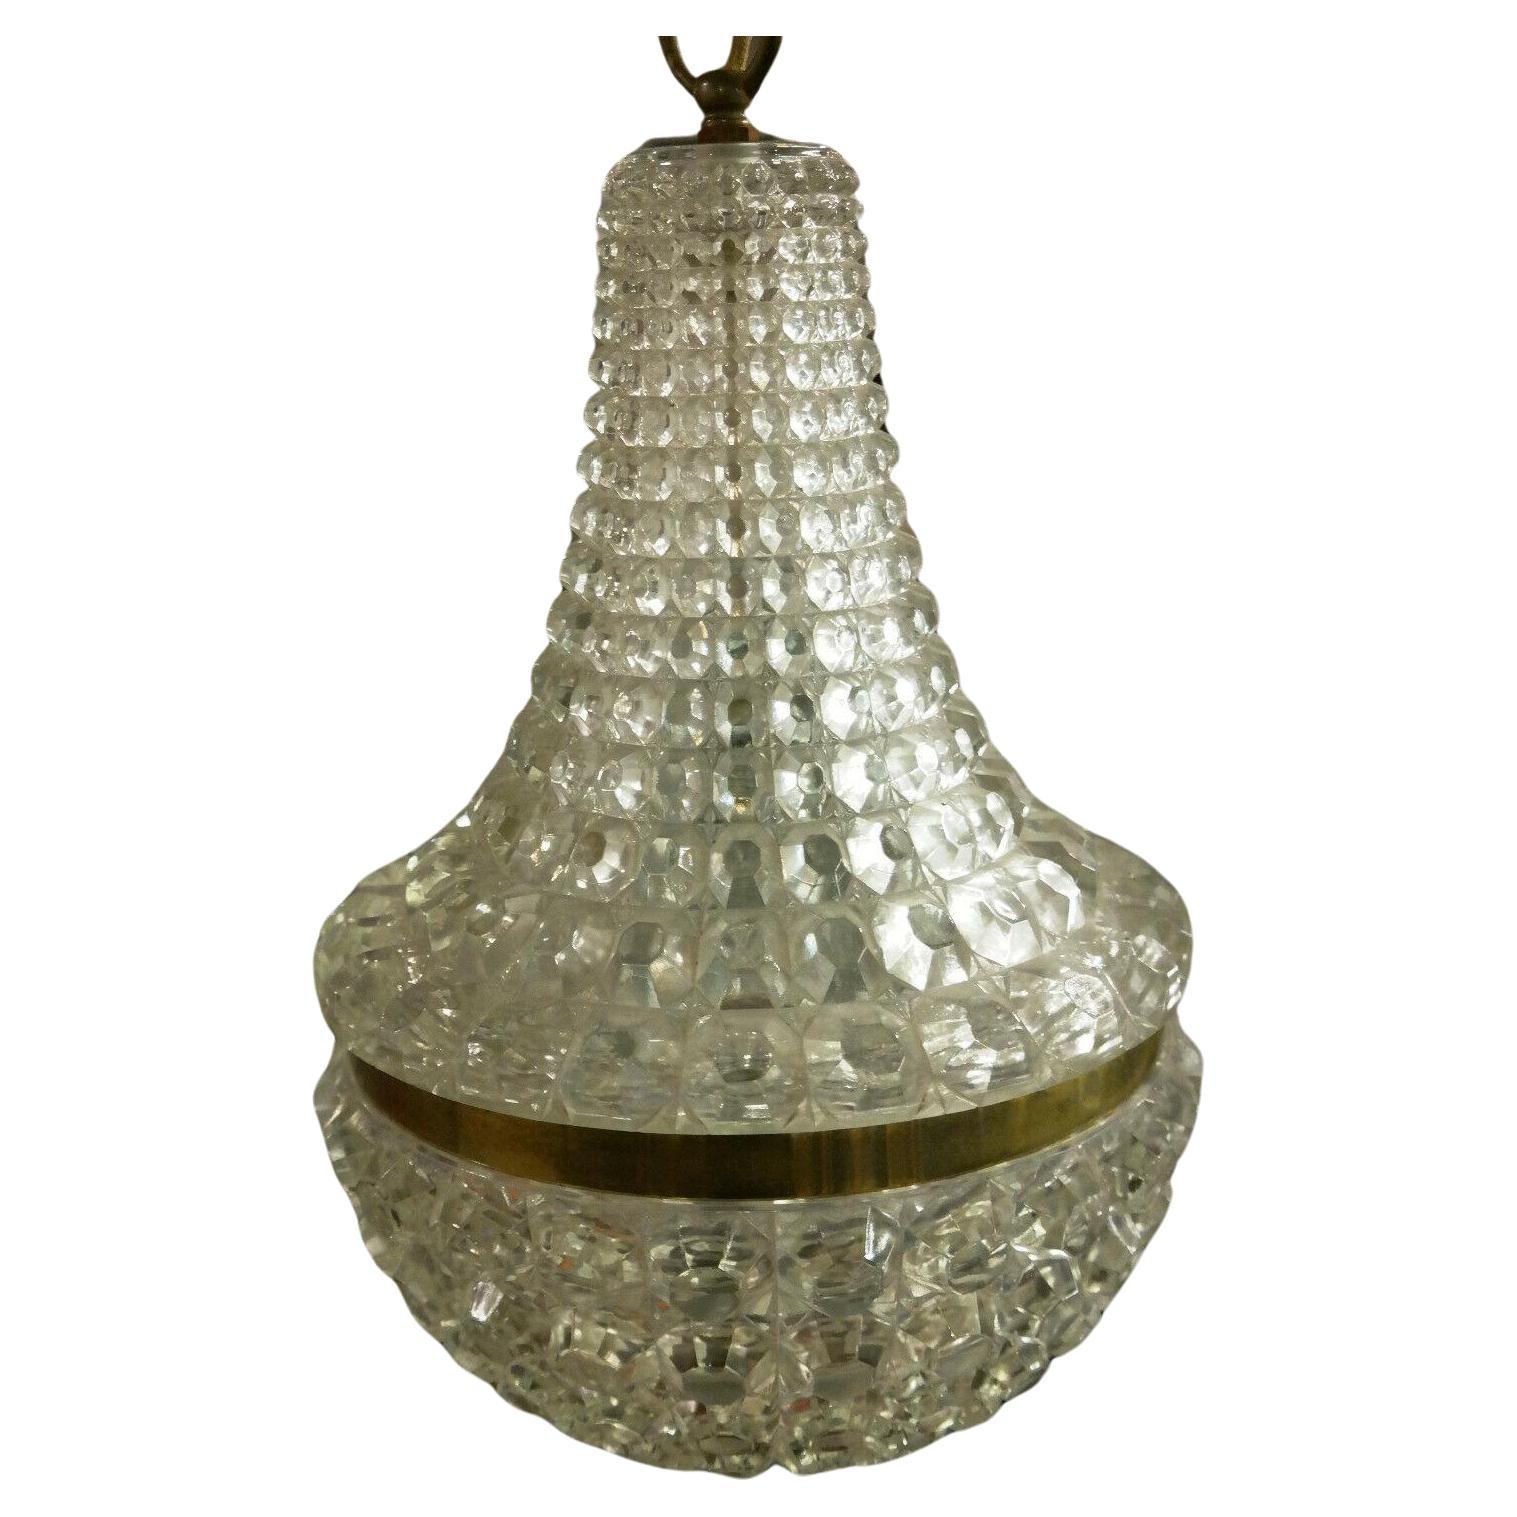 On offer a c1950s French Mid Century Modern Formed Art Glass Pendant Chandelier Fixture. This is an unmarked Baccarat fixture. Bag and tent form. Quite unique!